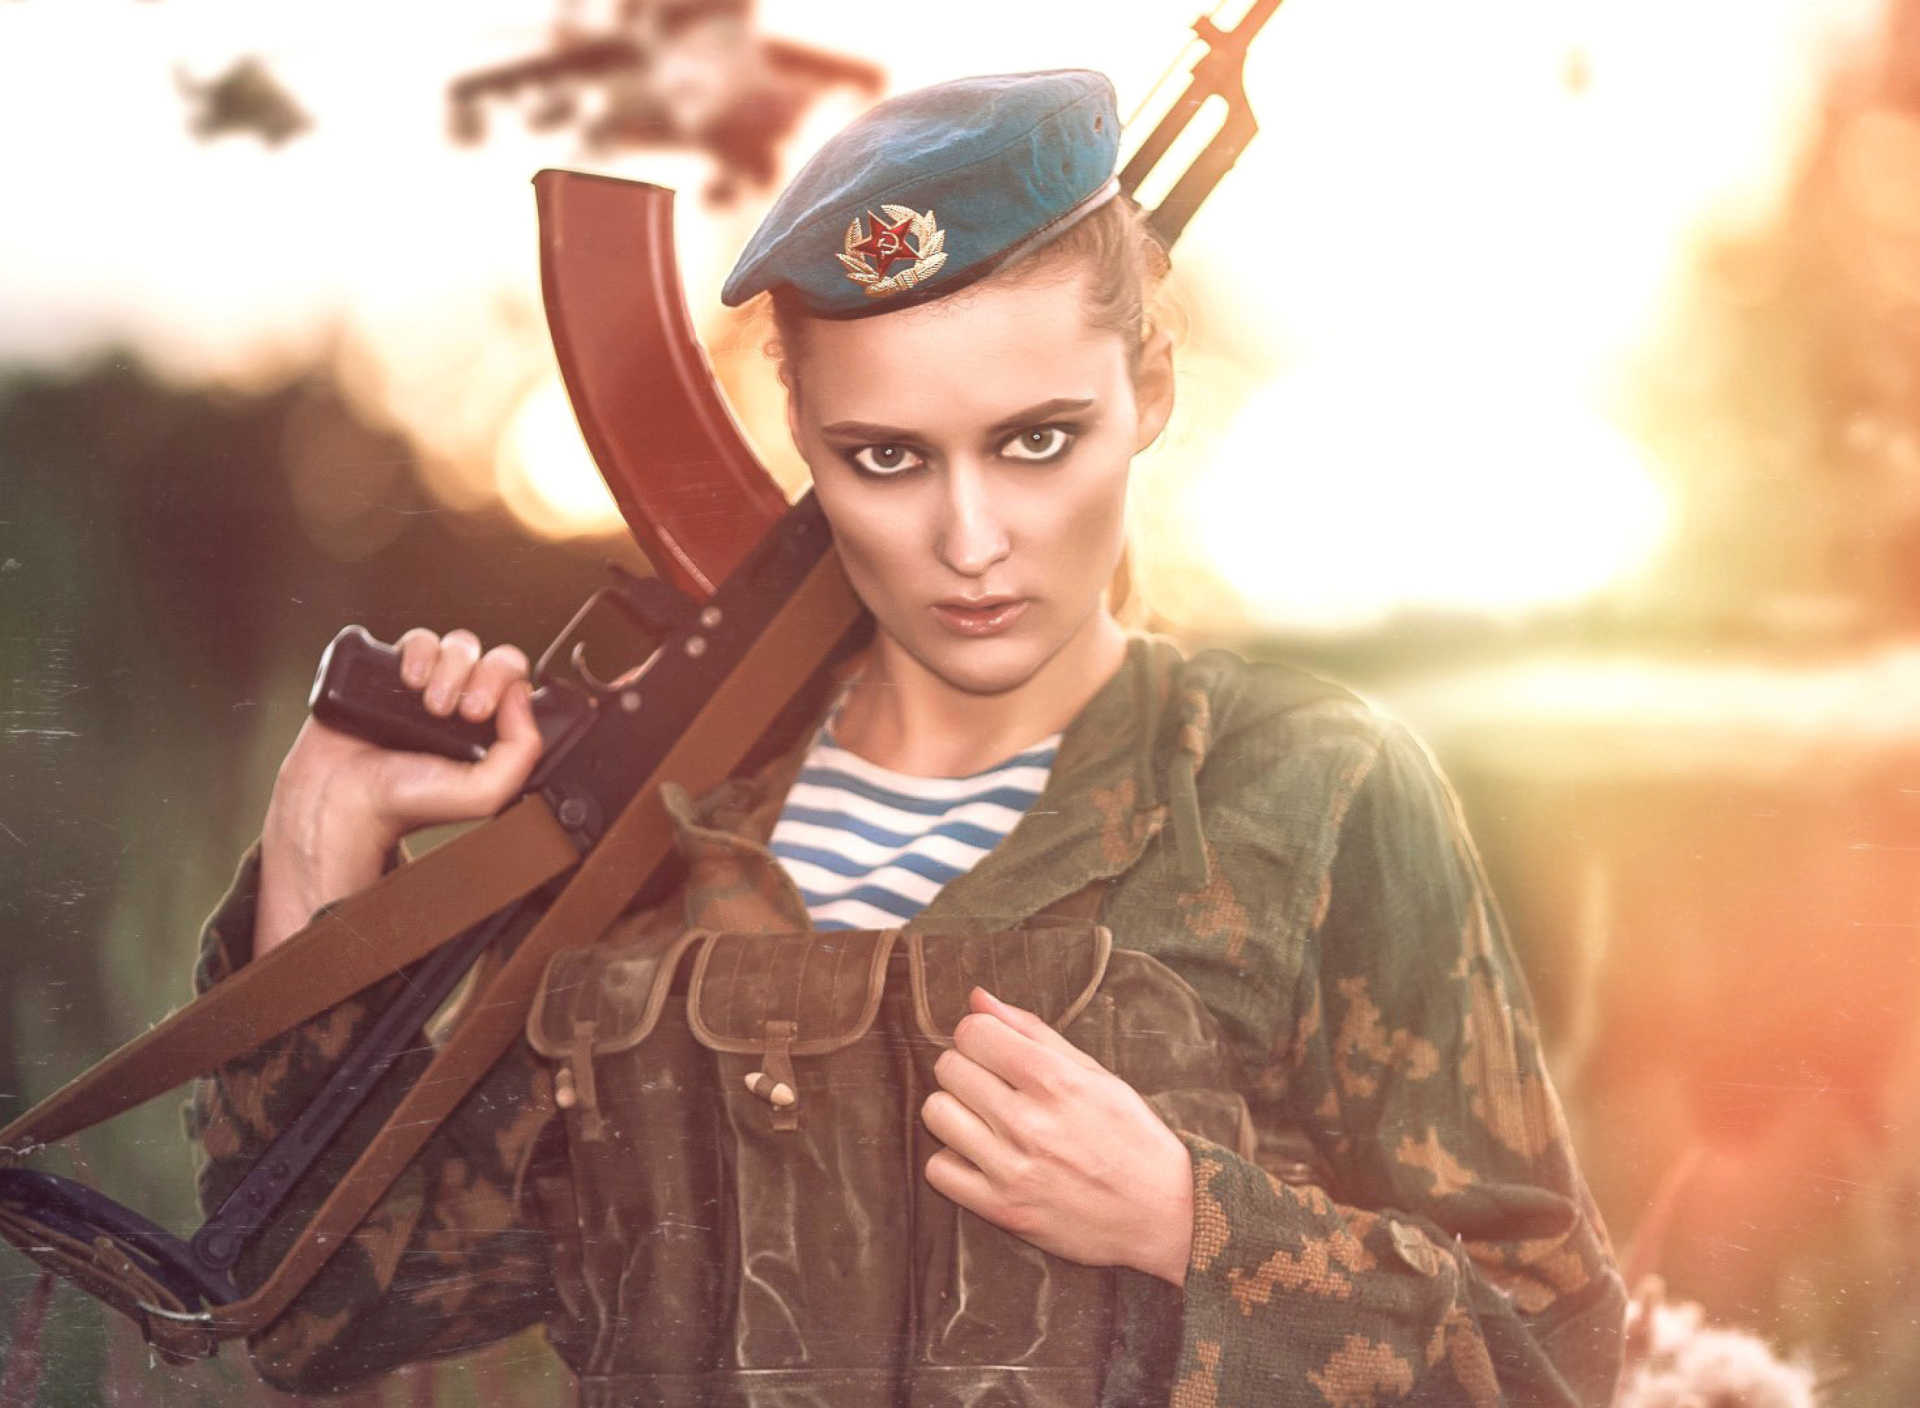 Russian Girl and Weapon HD wallpaper 1920x1408